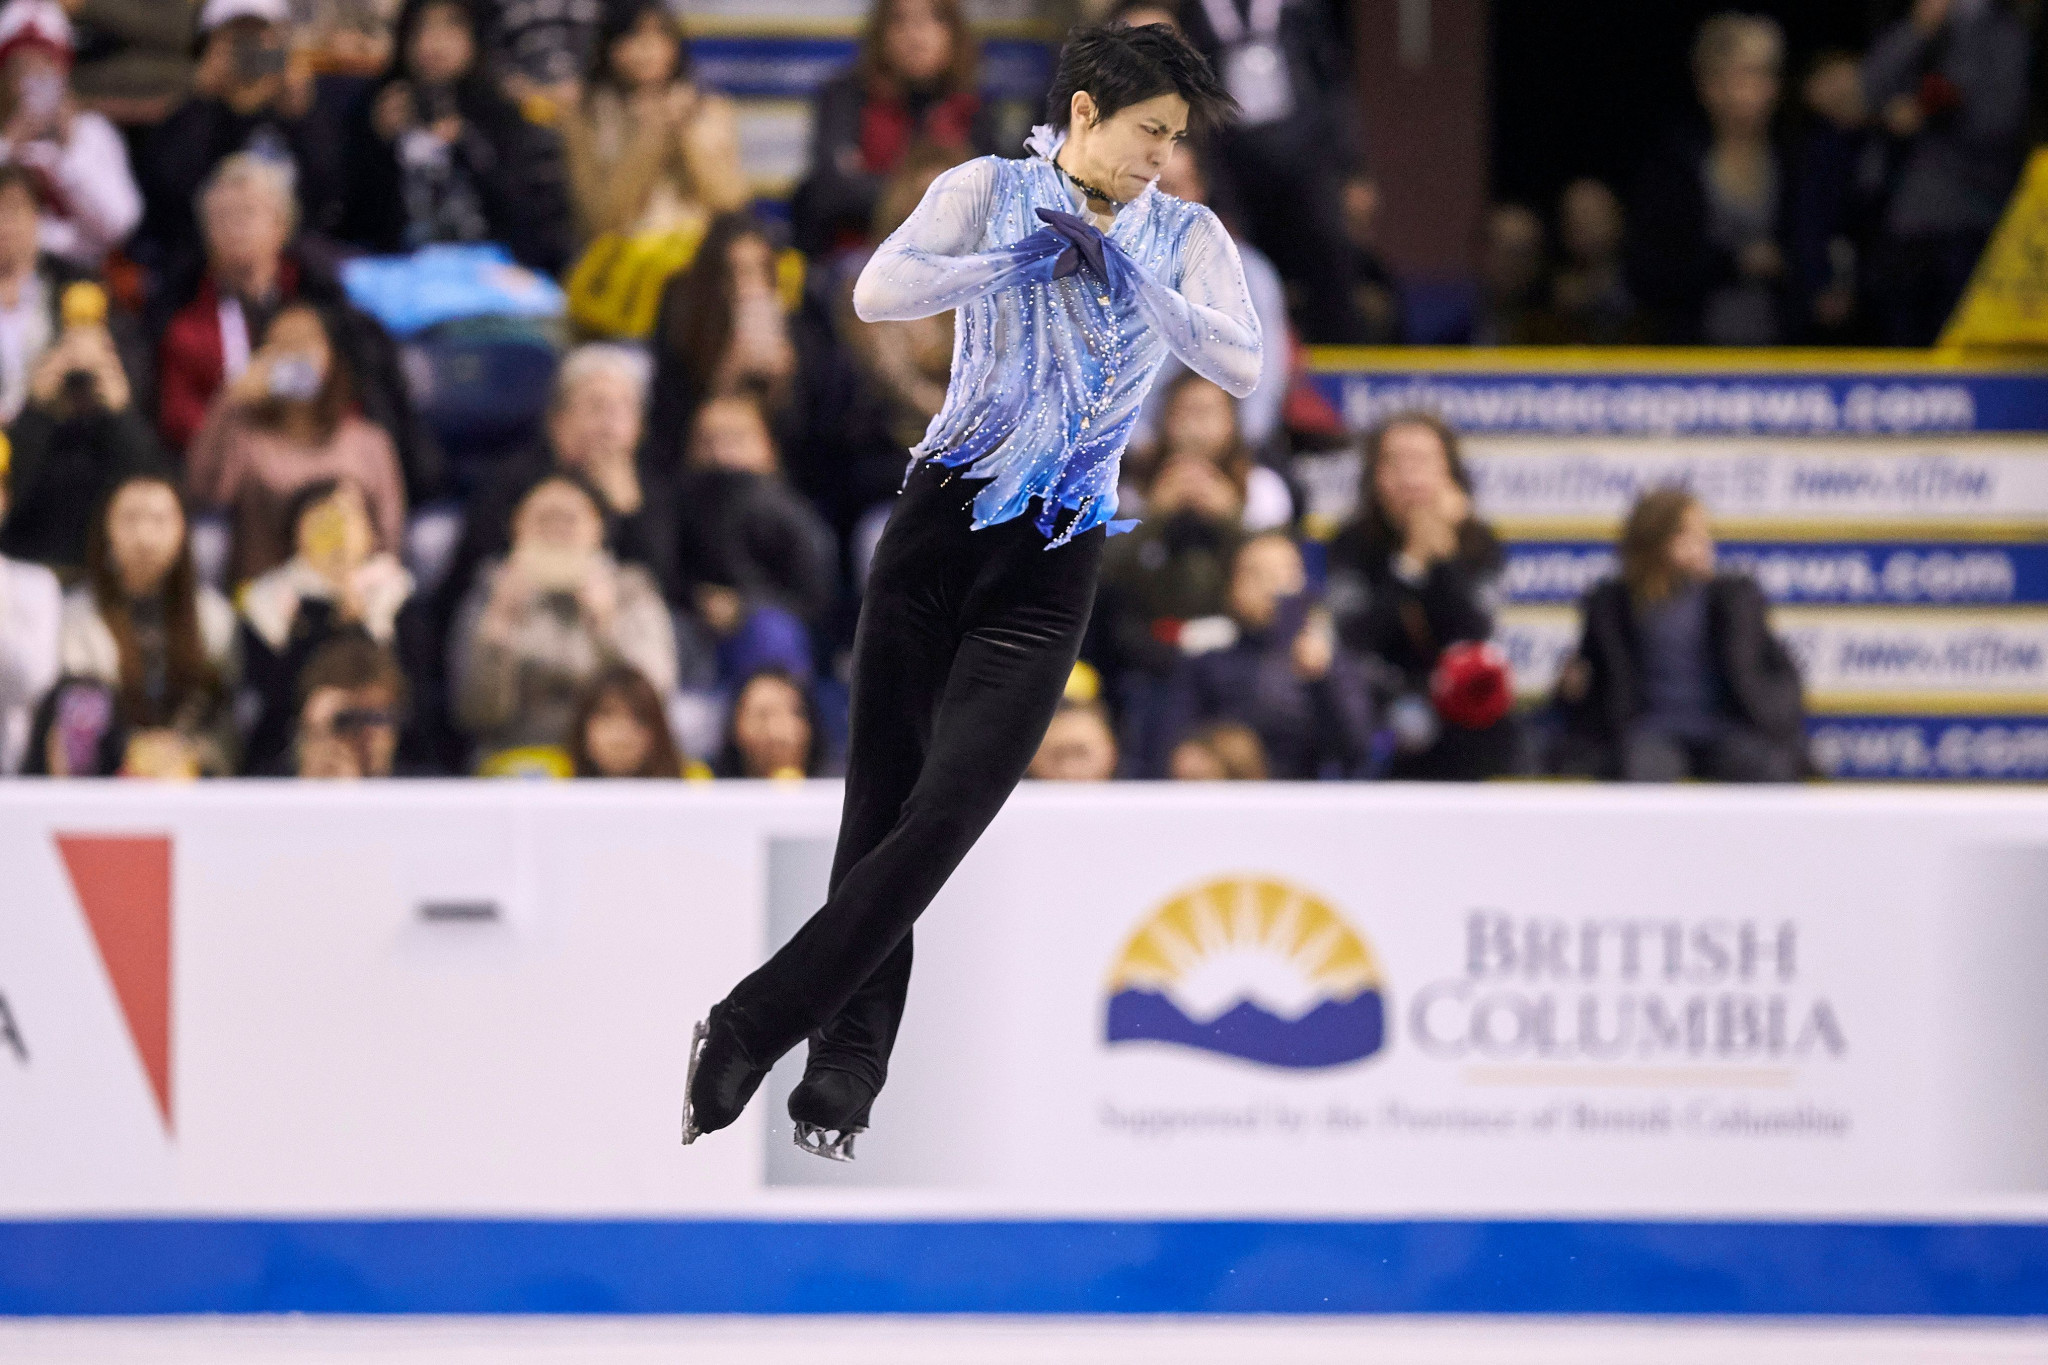 Yuzuru Hanyu has a huge lead after the short programme ©Getty Images